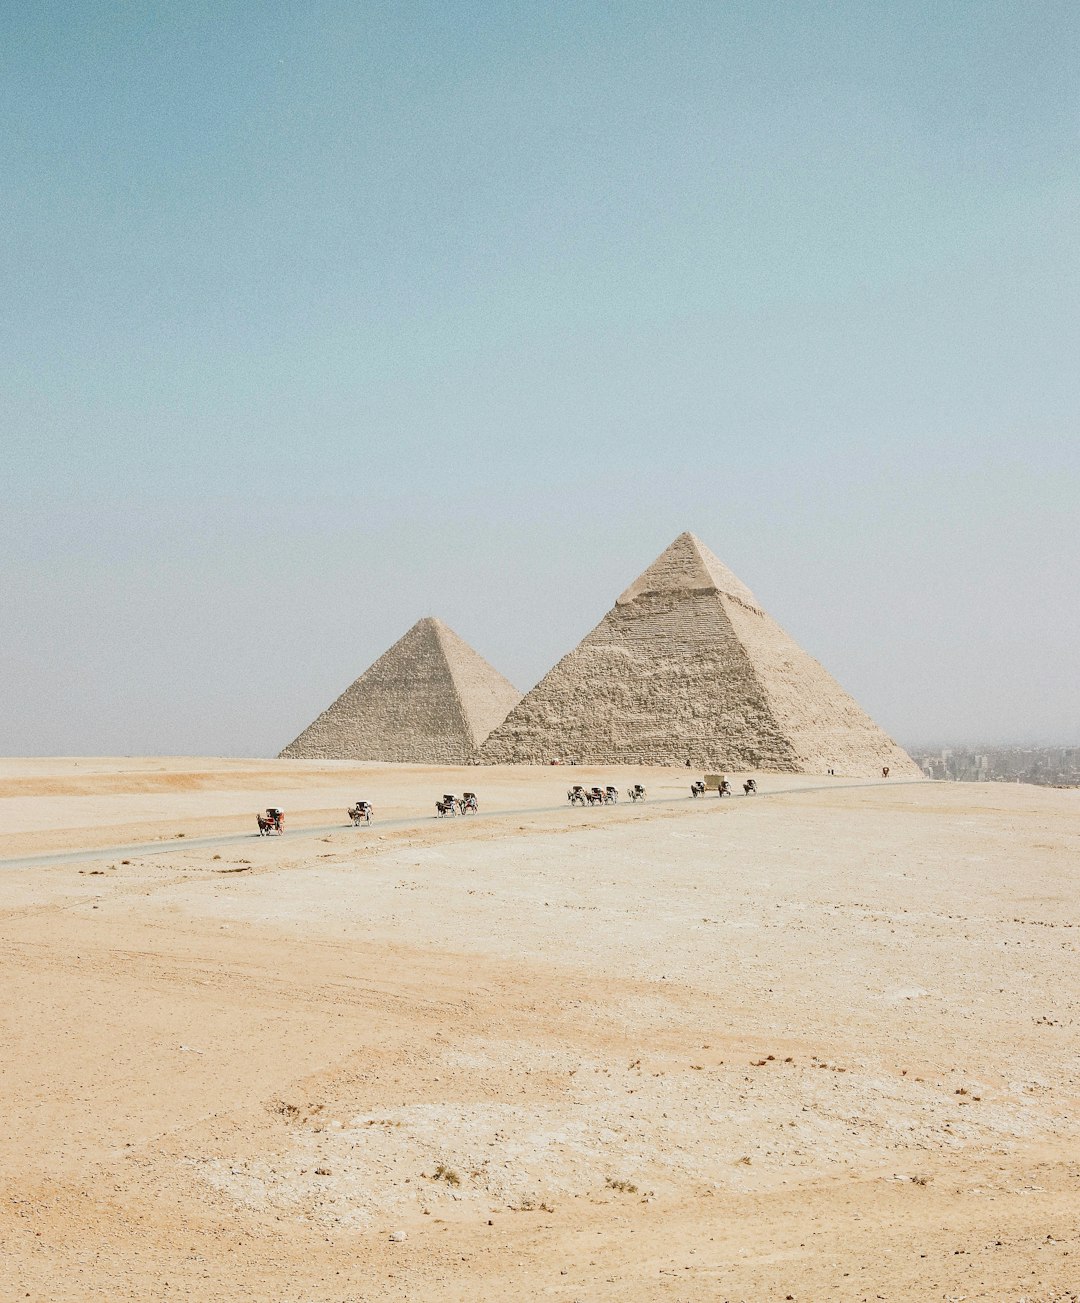 travelers stories about Historic site in The Pyramids of Giza, Egypt